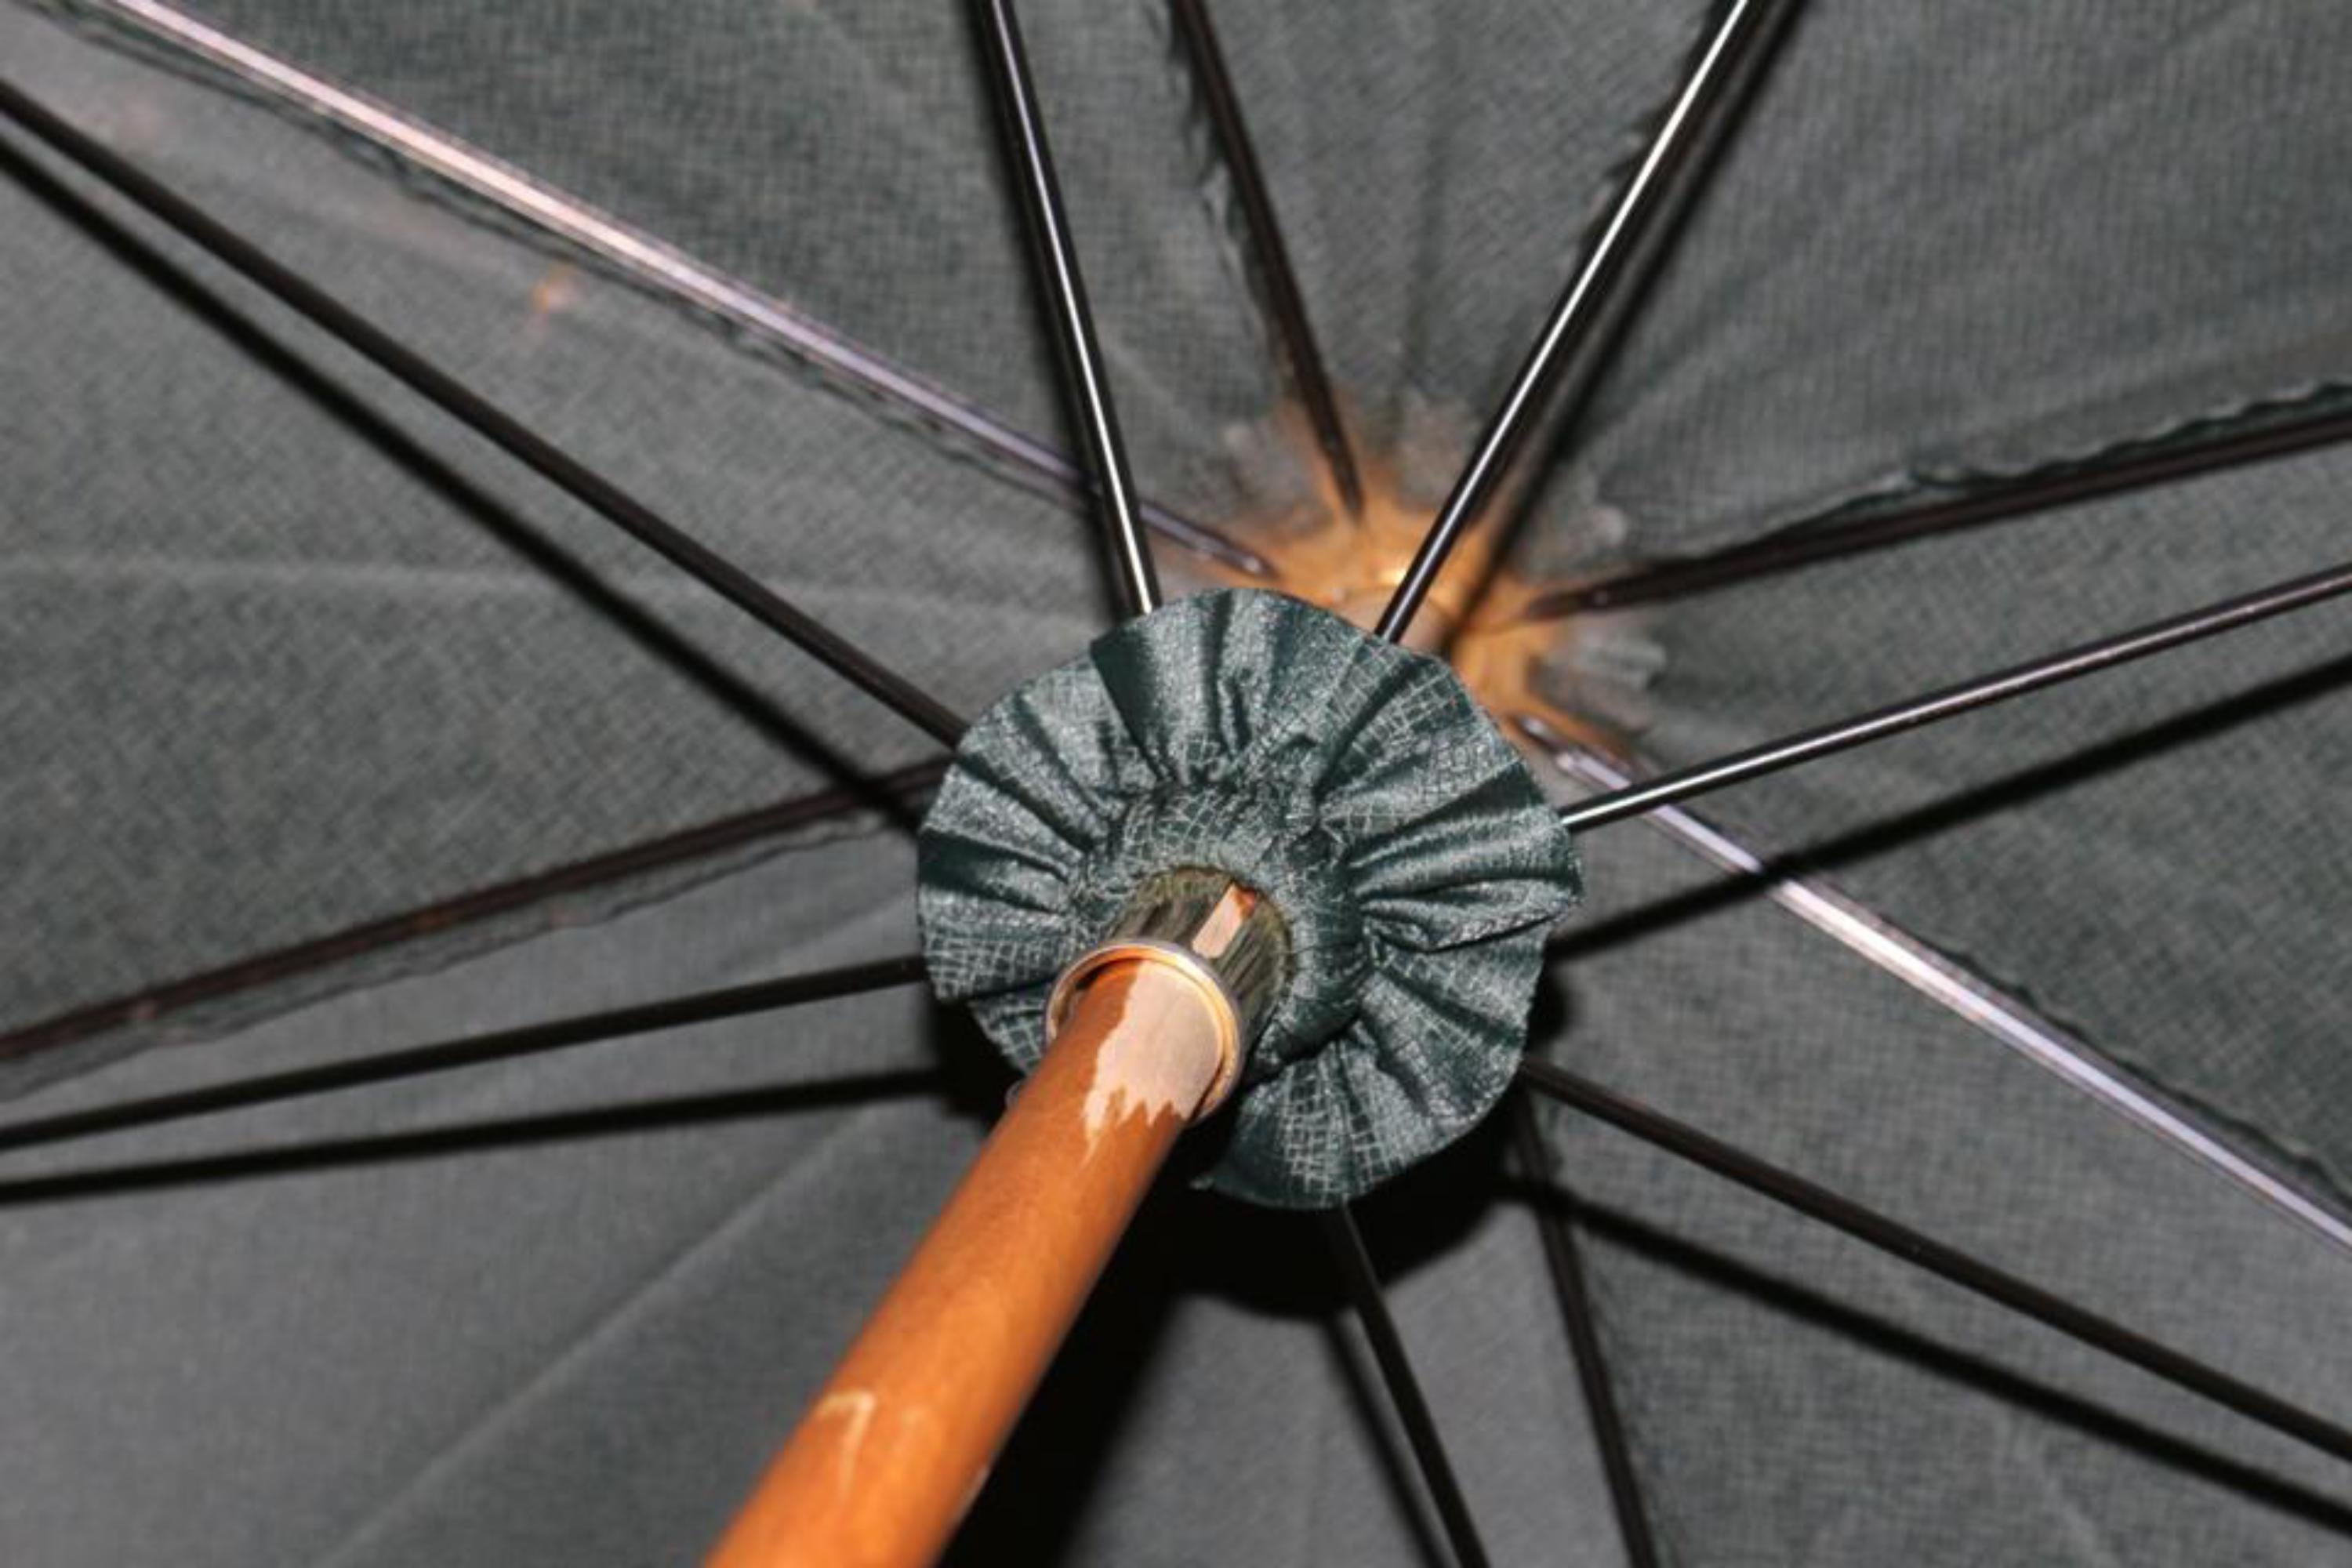 Louis Vuitton Green Umbrella 1020lv57 In Good Condition For Sale In Dix hills, NY